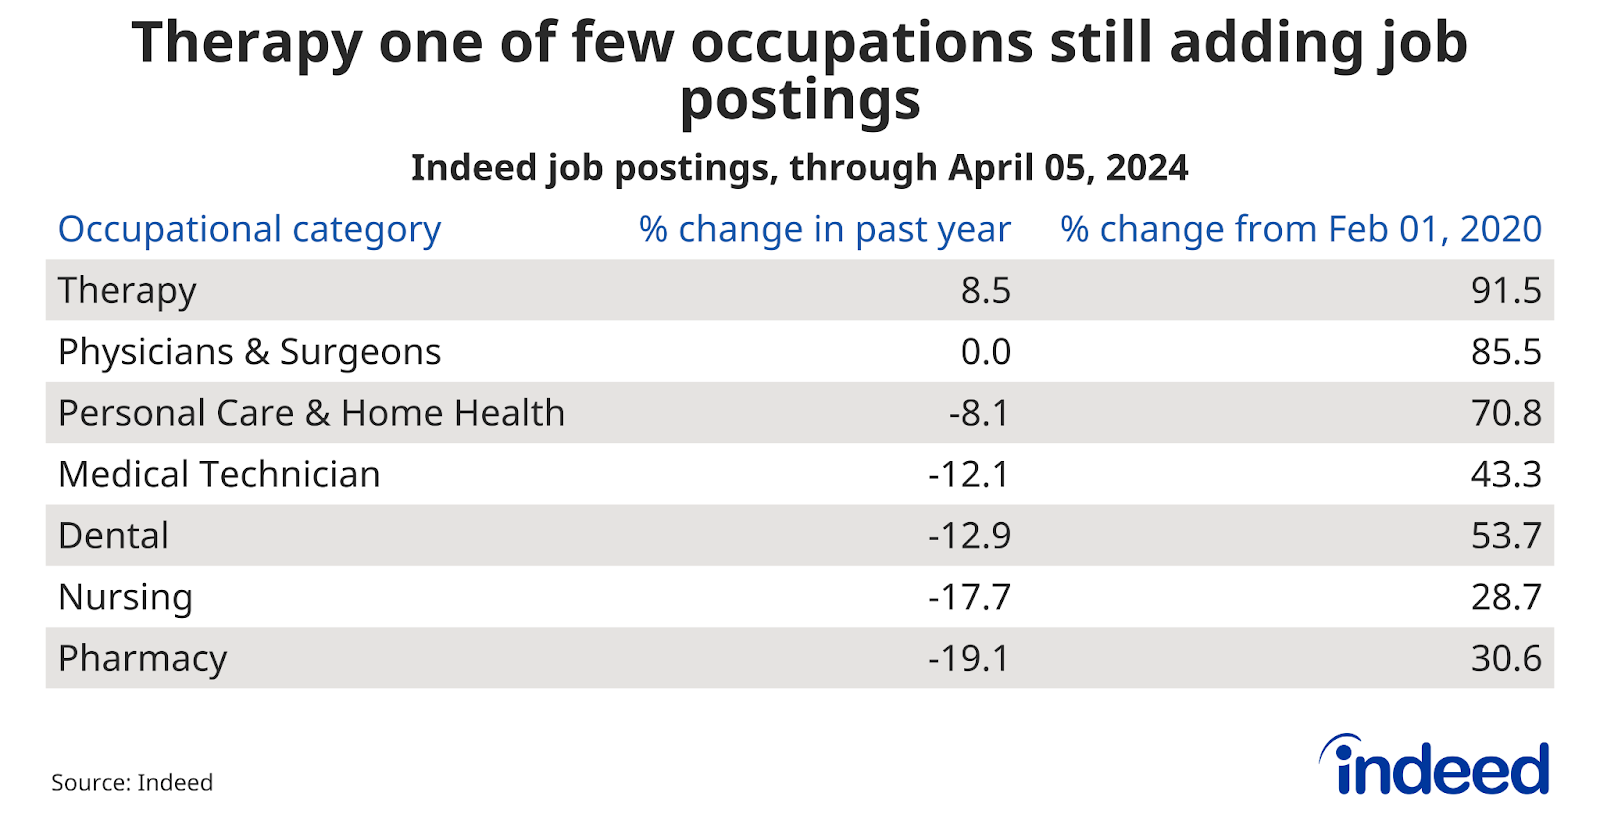 Table showing job posting trends, over the past year through April 5, 2024, and from the pre-pandemic baseline, for several healthcare occupations. Therapy job postings increased 8.5% over the past year while nursing job postings fell by 17.7%.